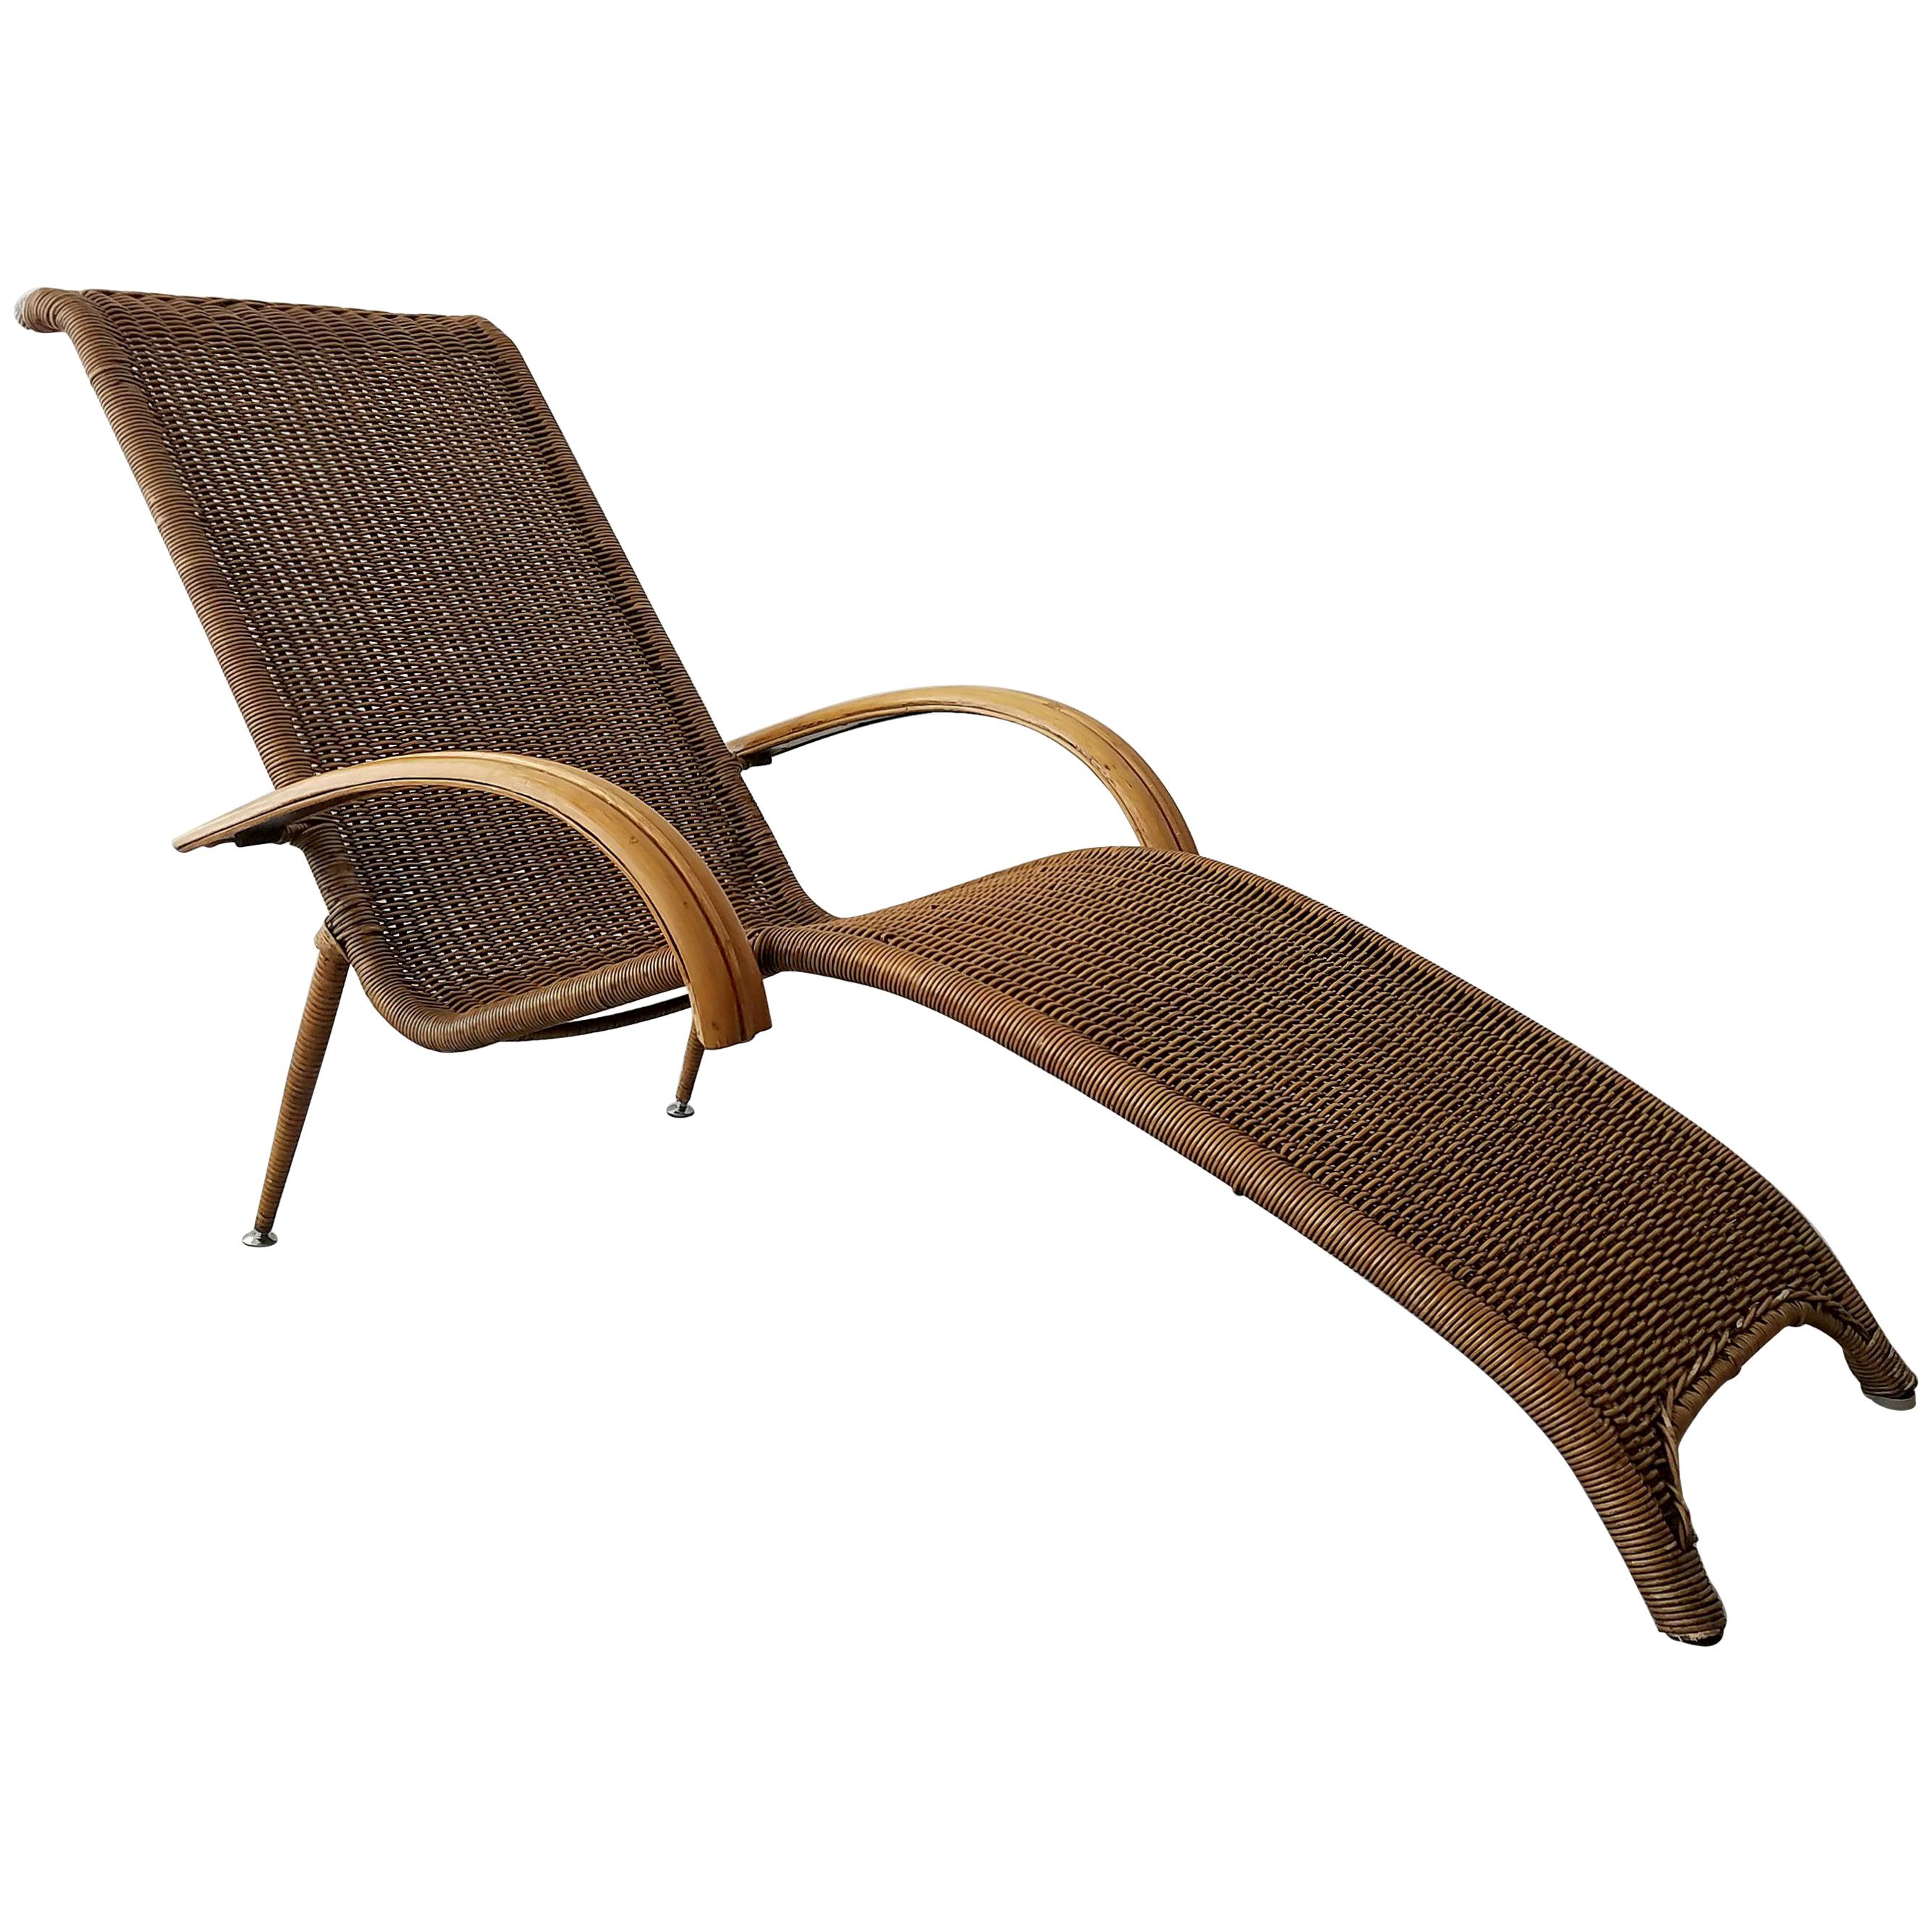 Midcentury Sculptural Italian Modern Cane and Bamboo Chaise Lounge Chair